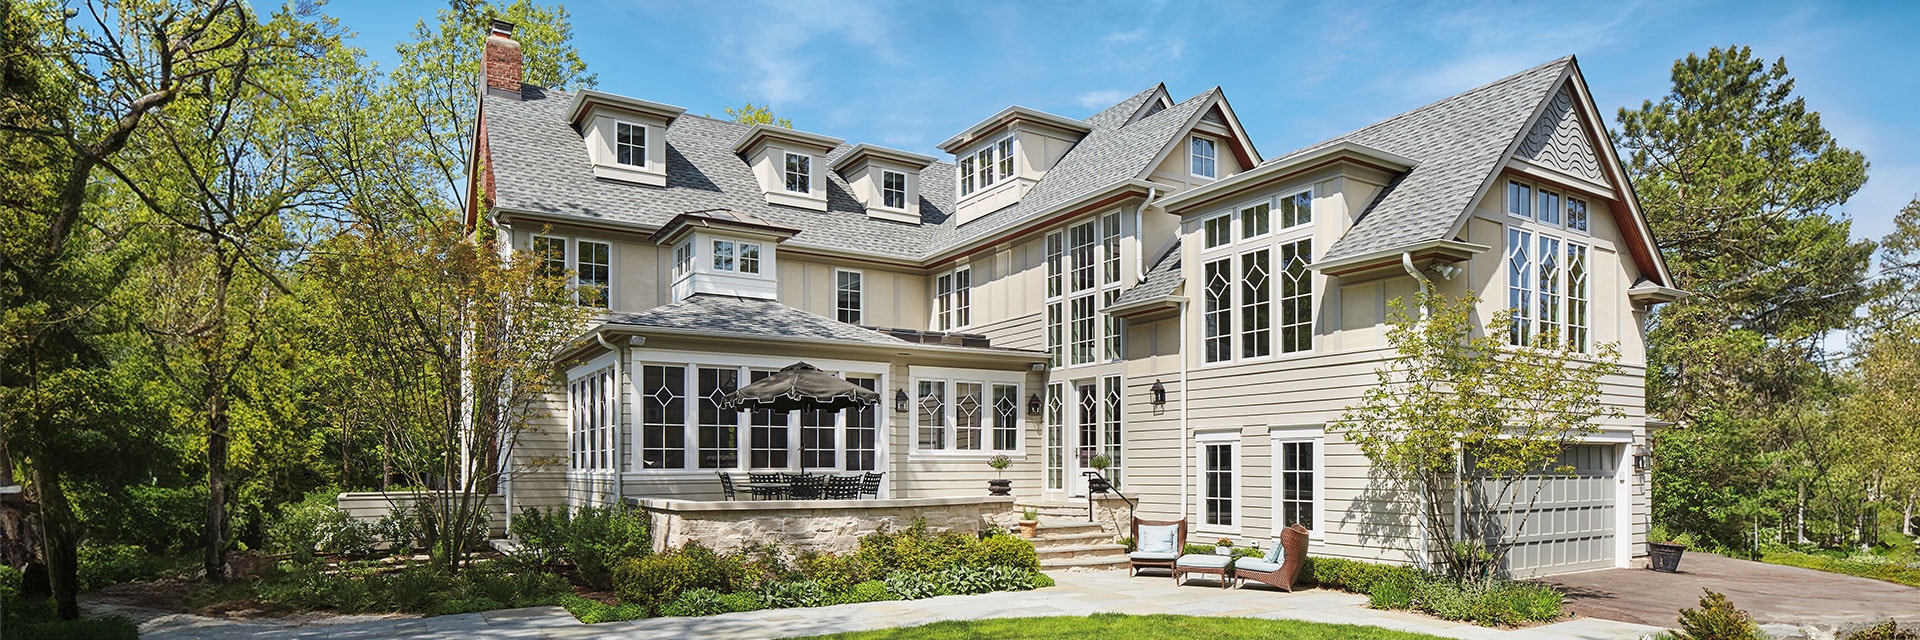 A large home in New York filled with windows and a walkout deck off the back door.